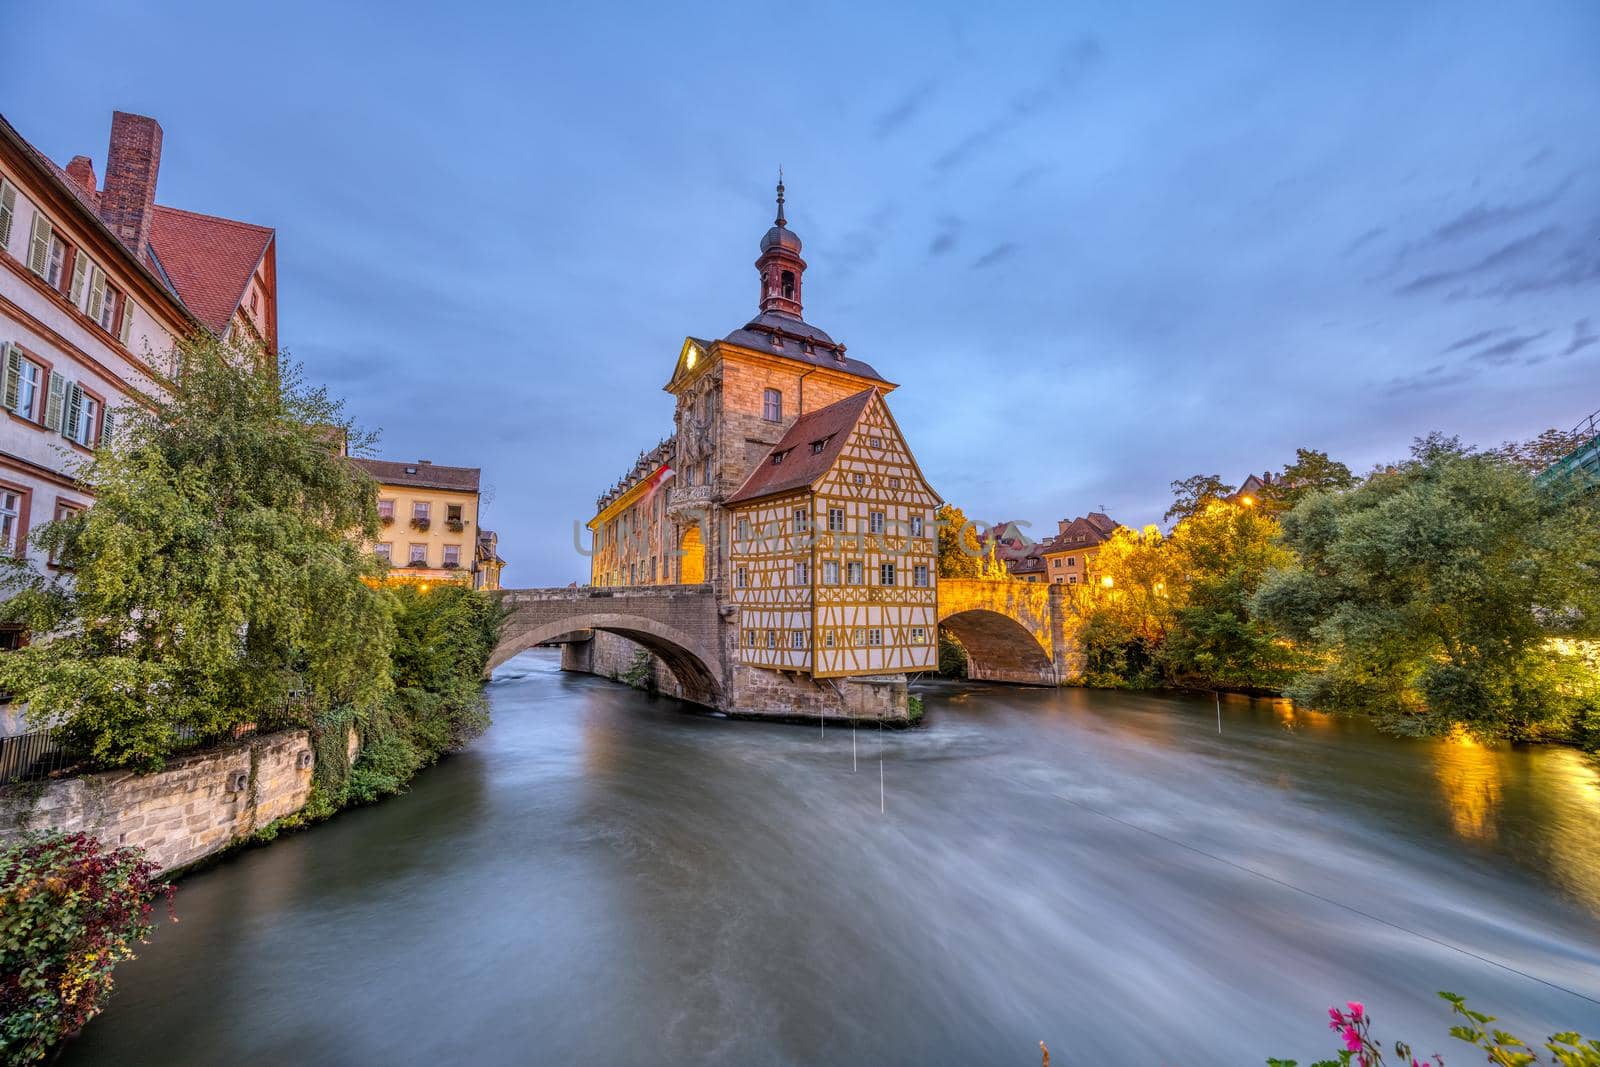 The famous Alte Rathaus in the beautiful city Bamberg in Bavaria, Germany, at dawn